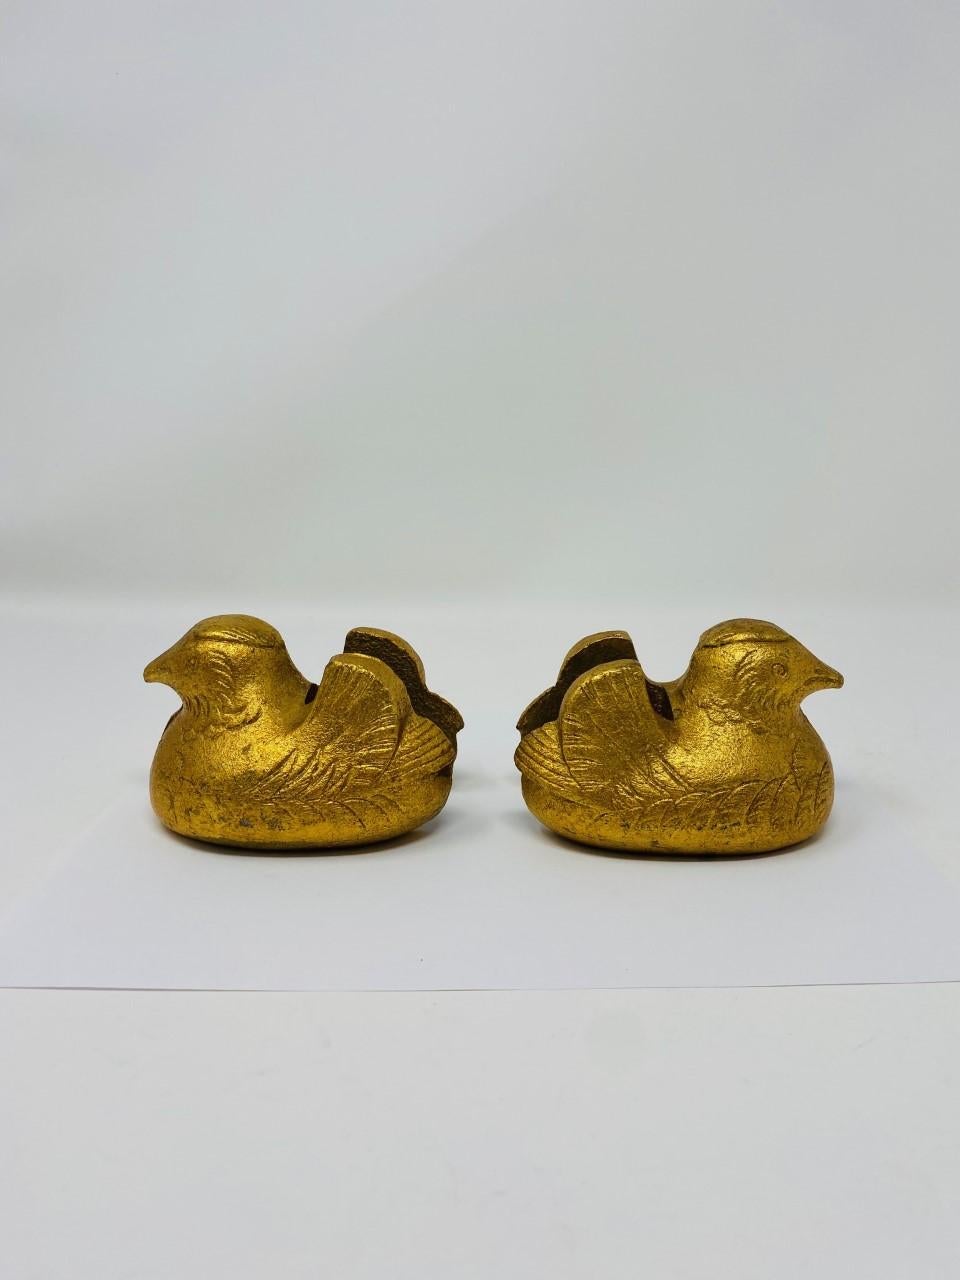 Incredible pair of Japanese hand cast gilt bronze Mandarin Duck screen holders with detailed plumage, Taisho period 1920. Each of these two sculptures is in great condition with an almost intact gilt finish. Beautiful works of art that serve as